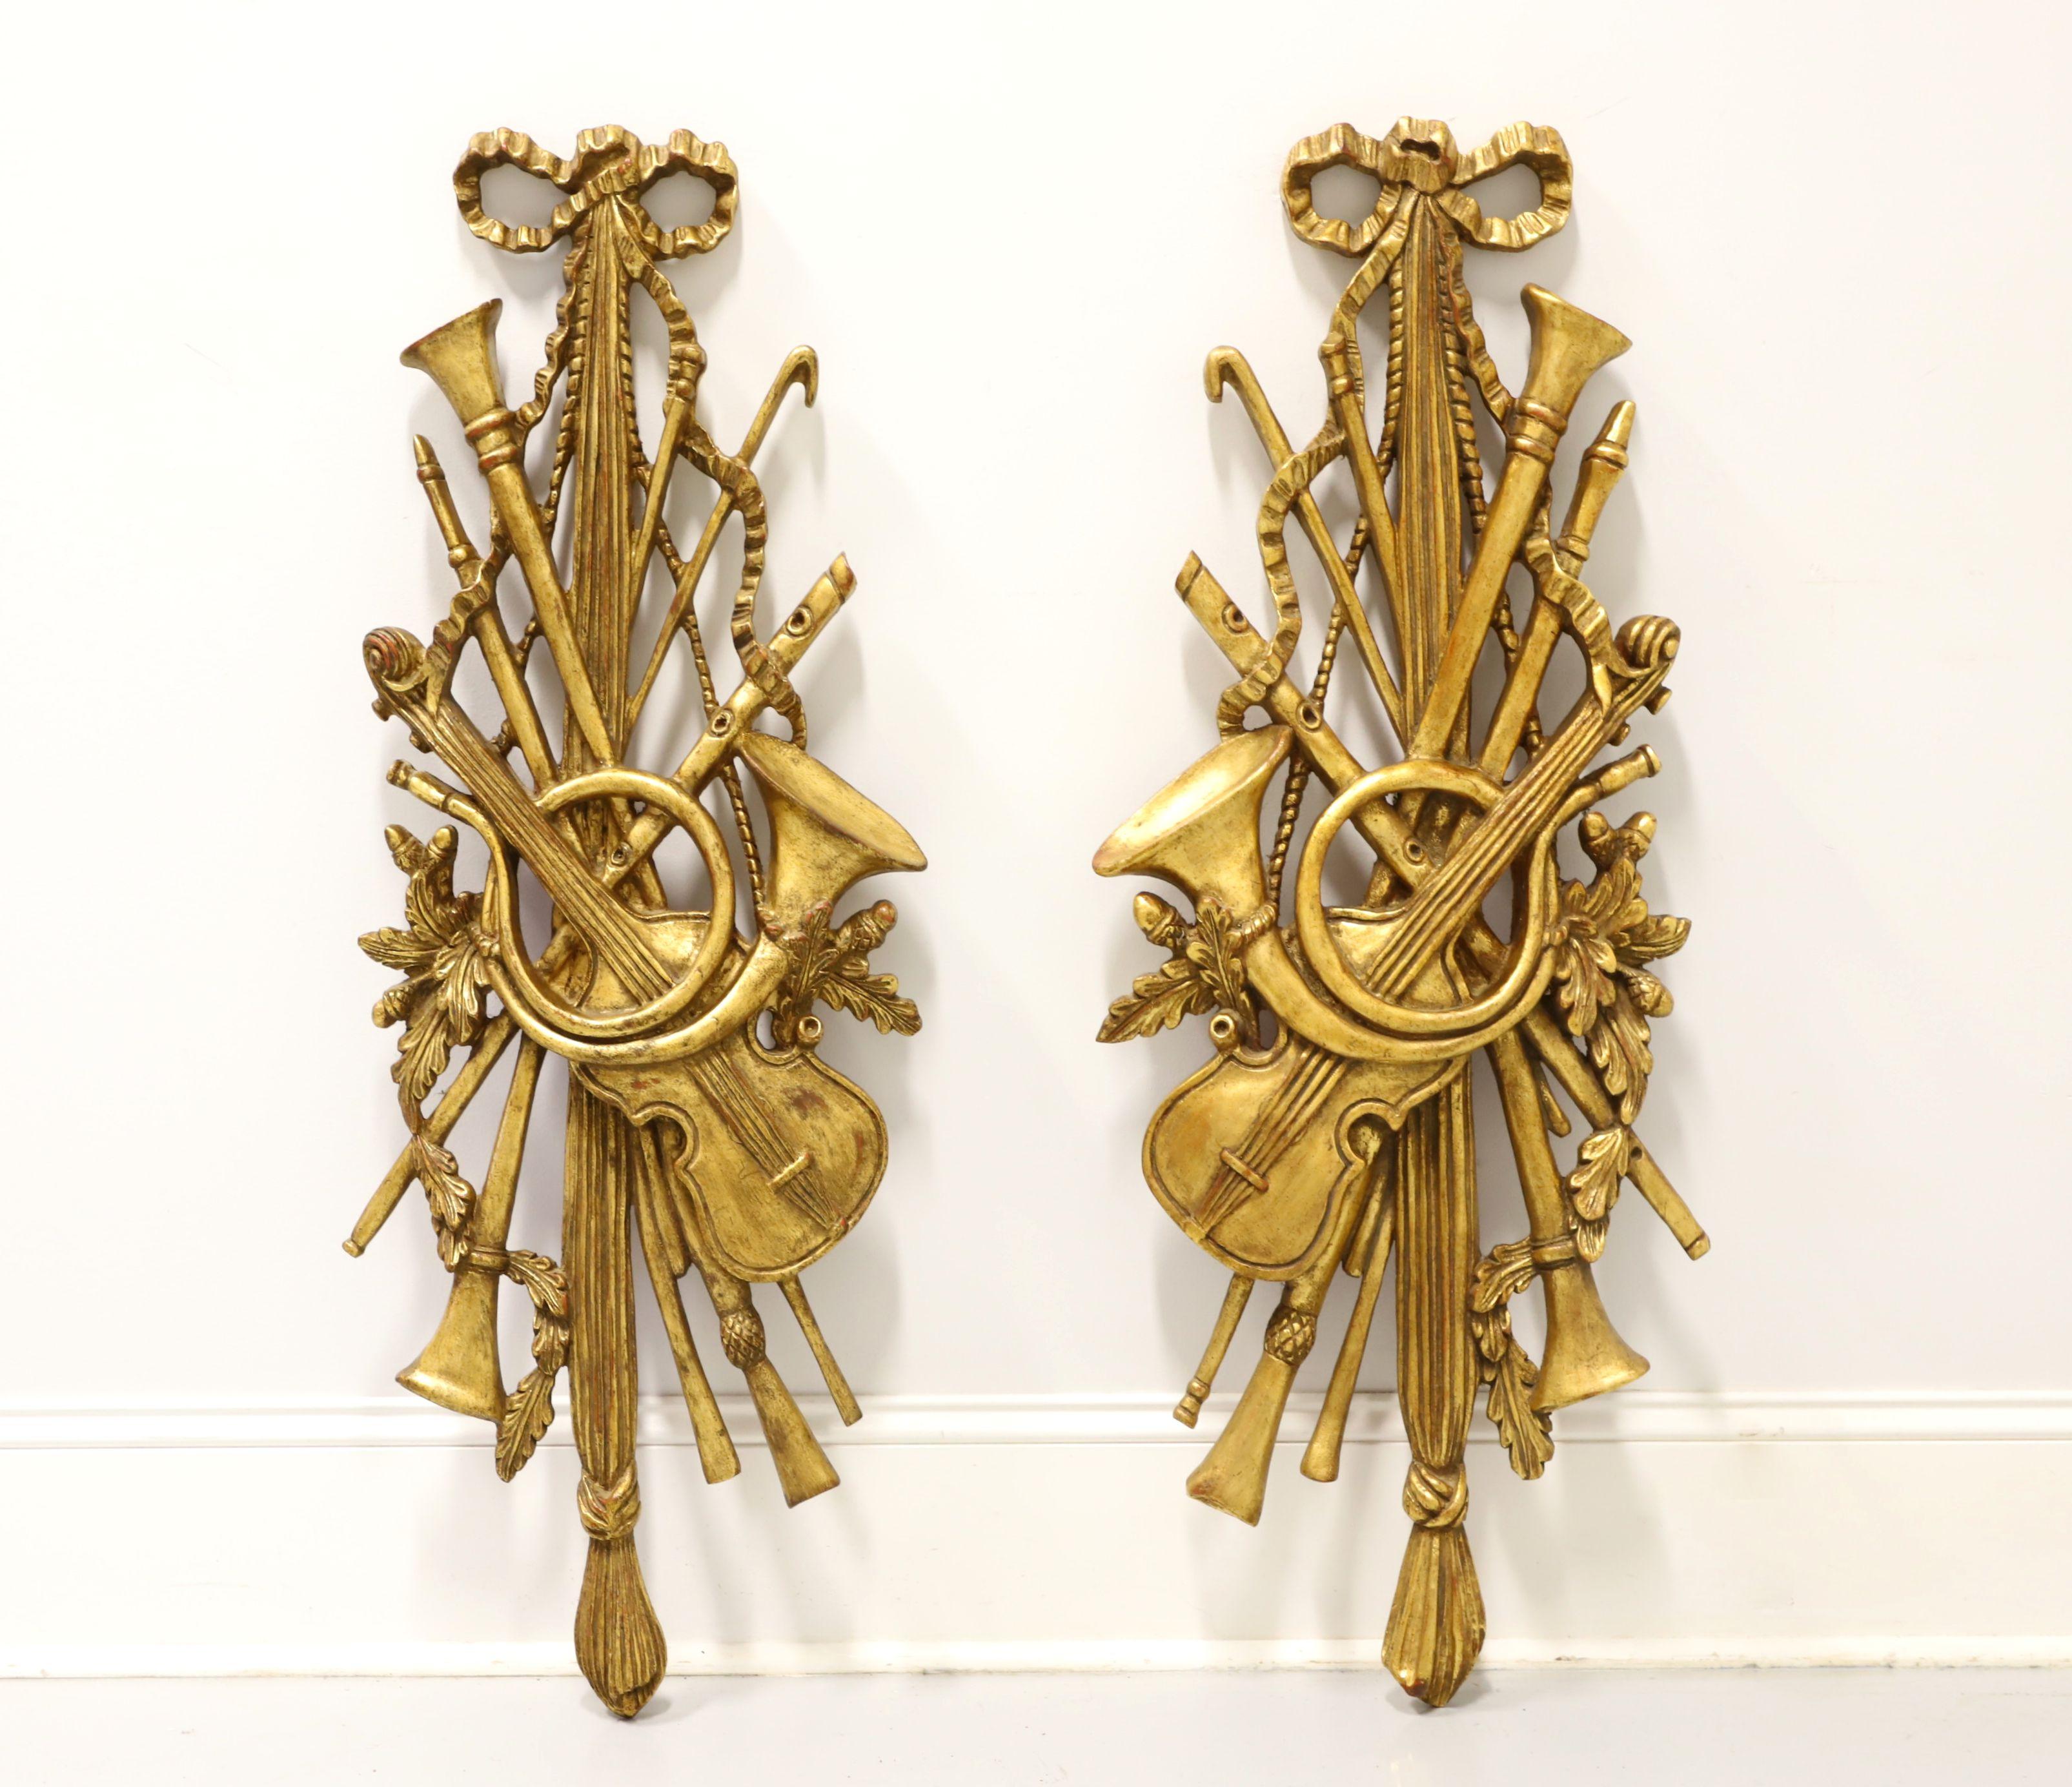 PALLADIO 1960's Carved Wood Musical Instrument Wall Sculpture - Pair For Sale 4